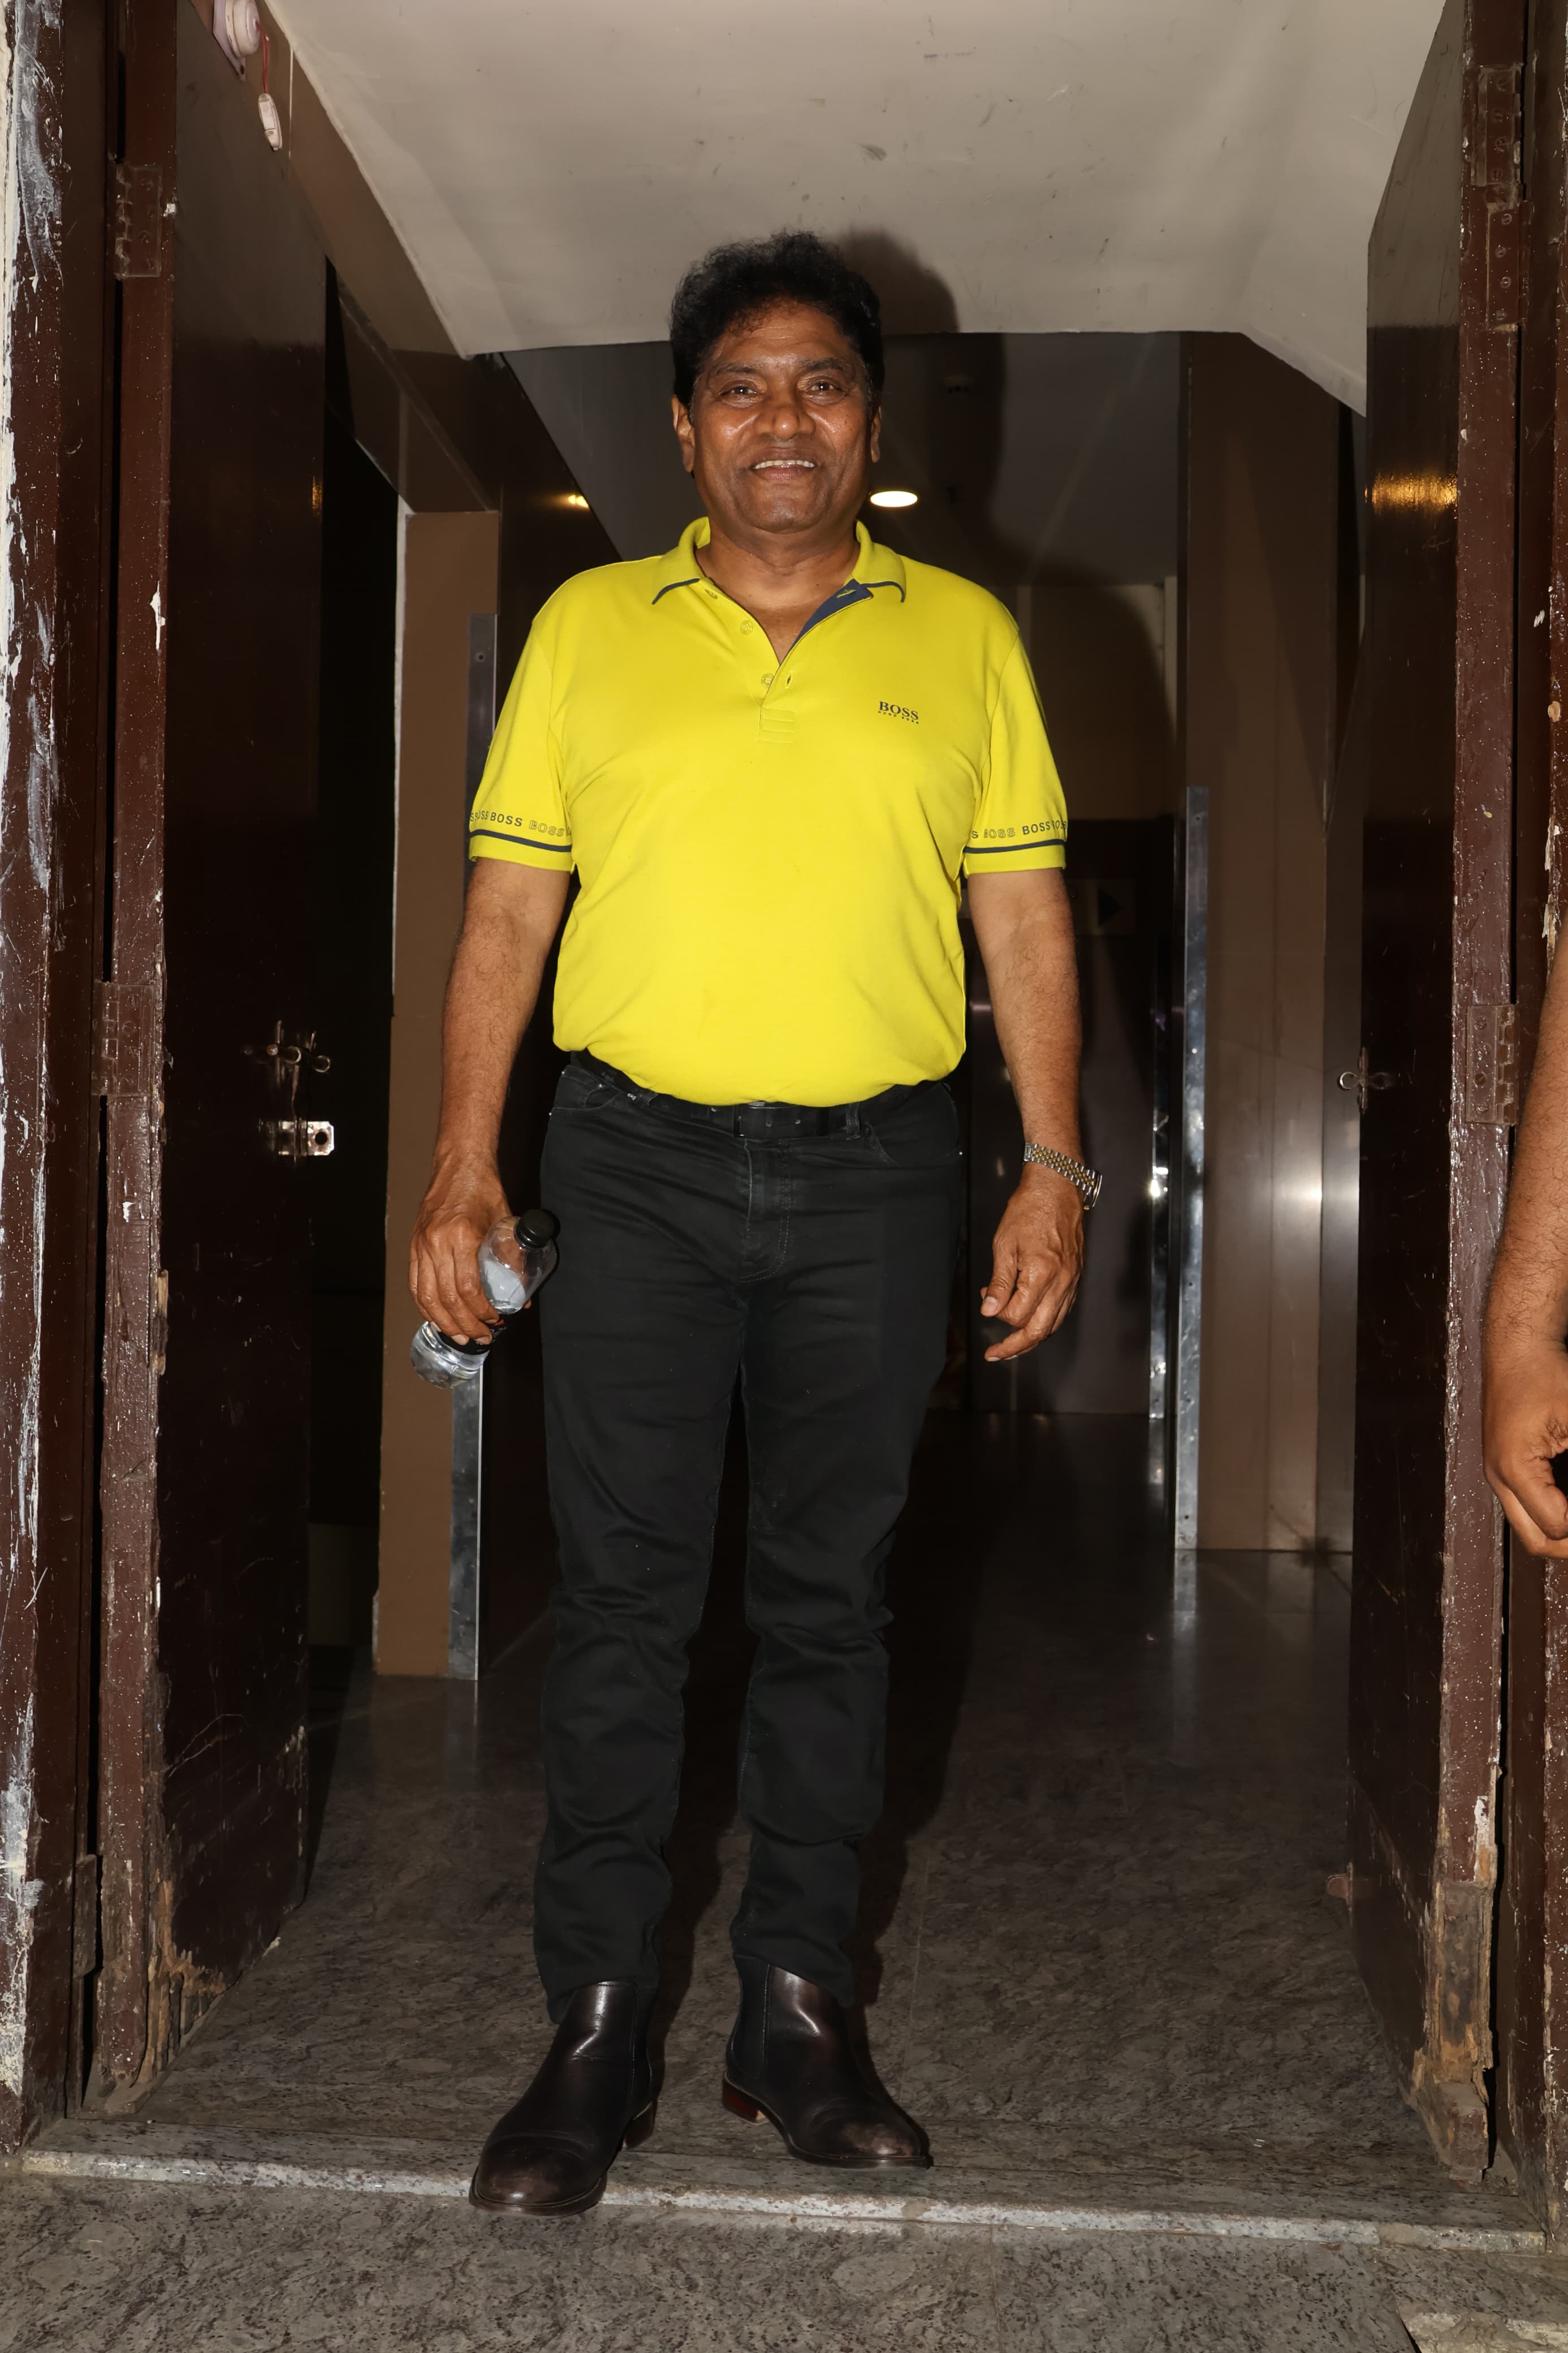 Johnny Lever wore casual yellow T-shirt and black pants as he went to watch Juna furniture